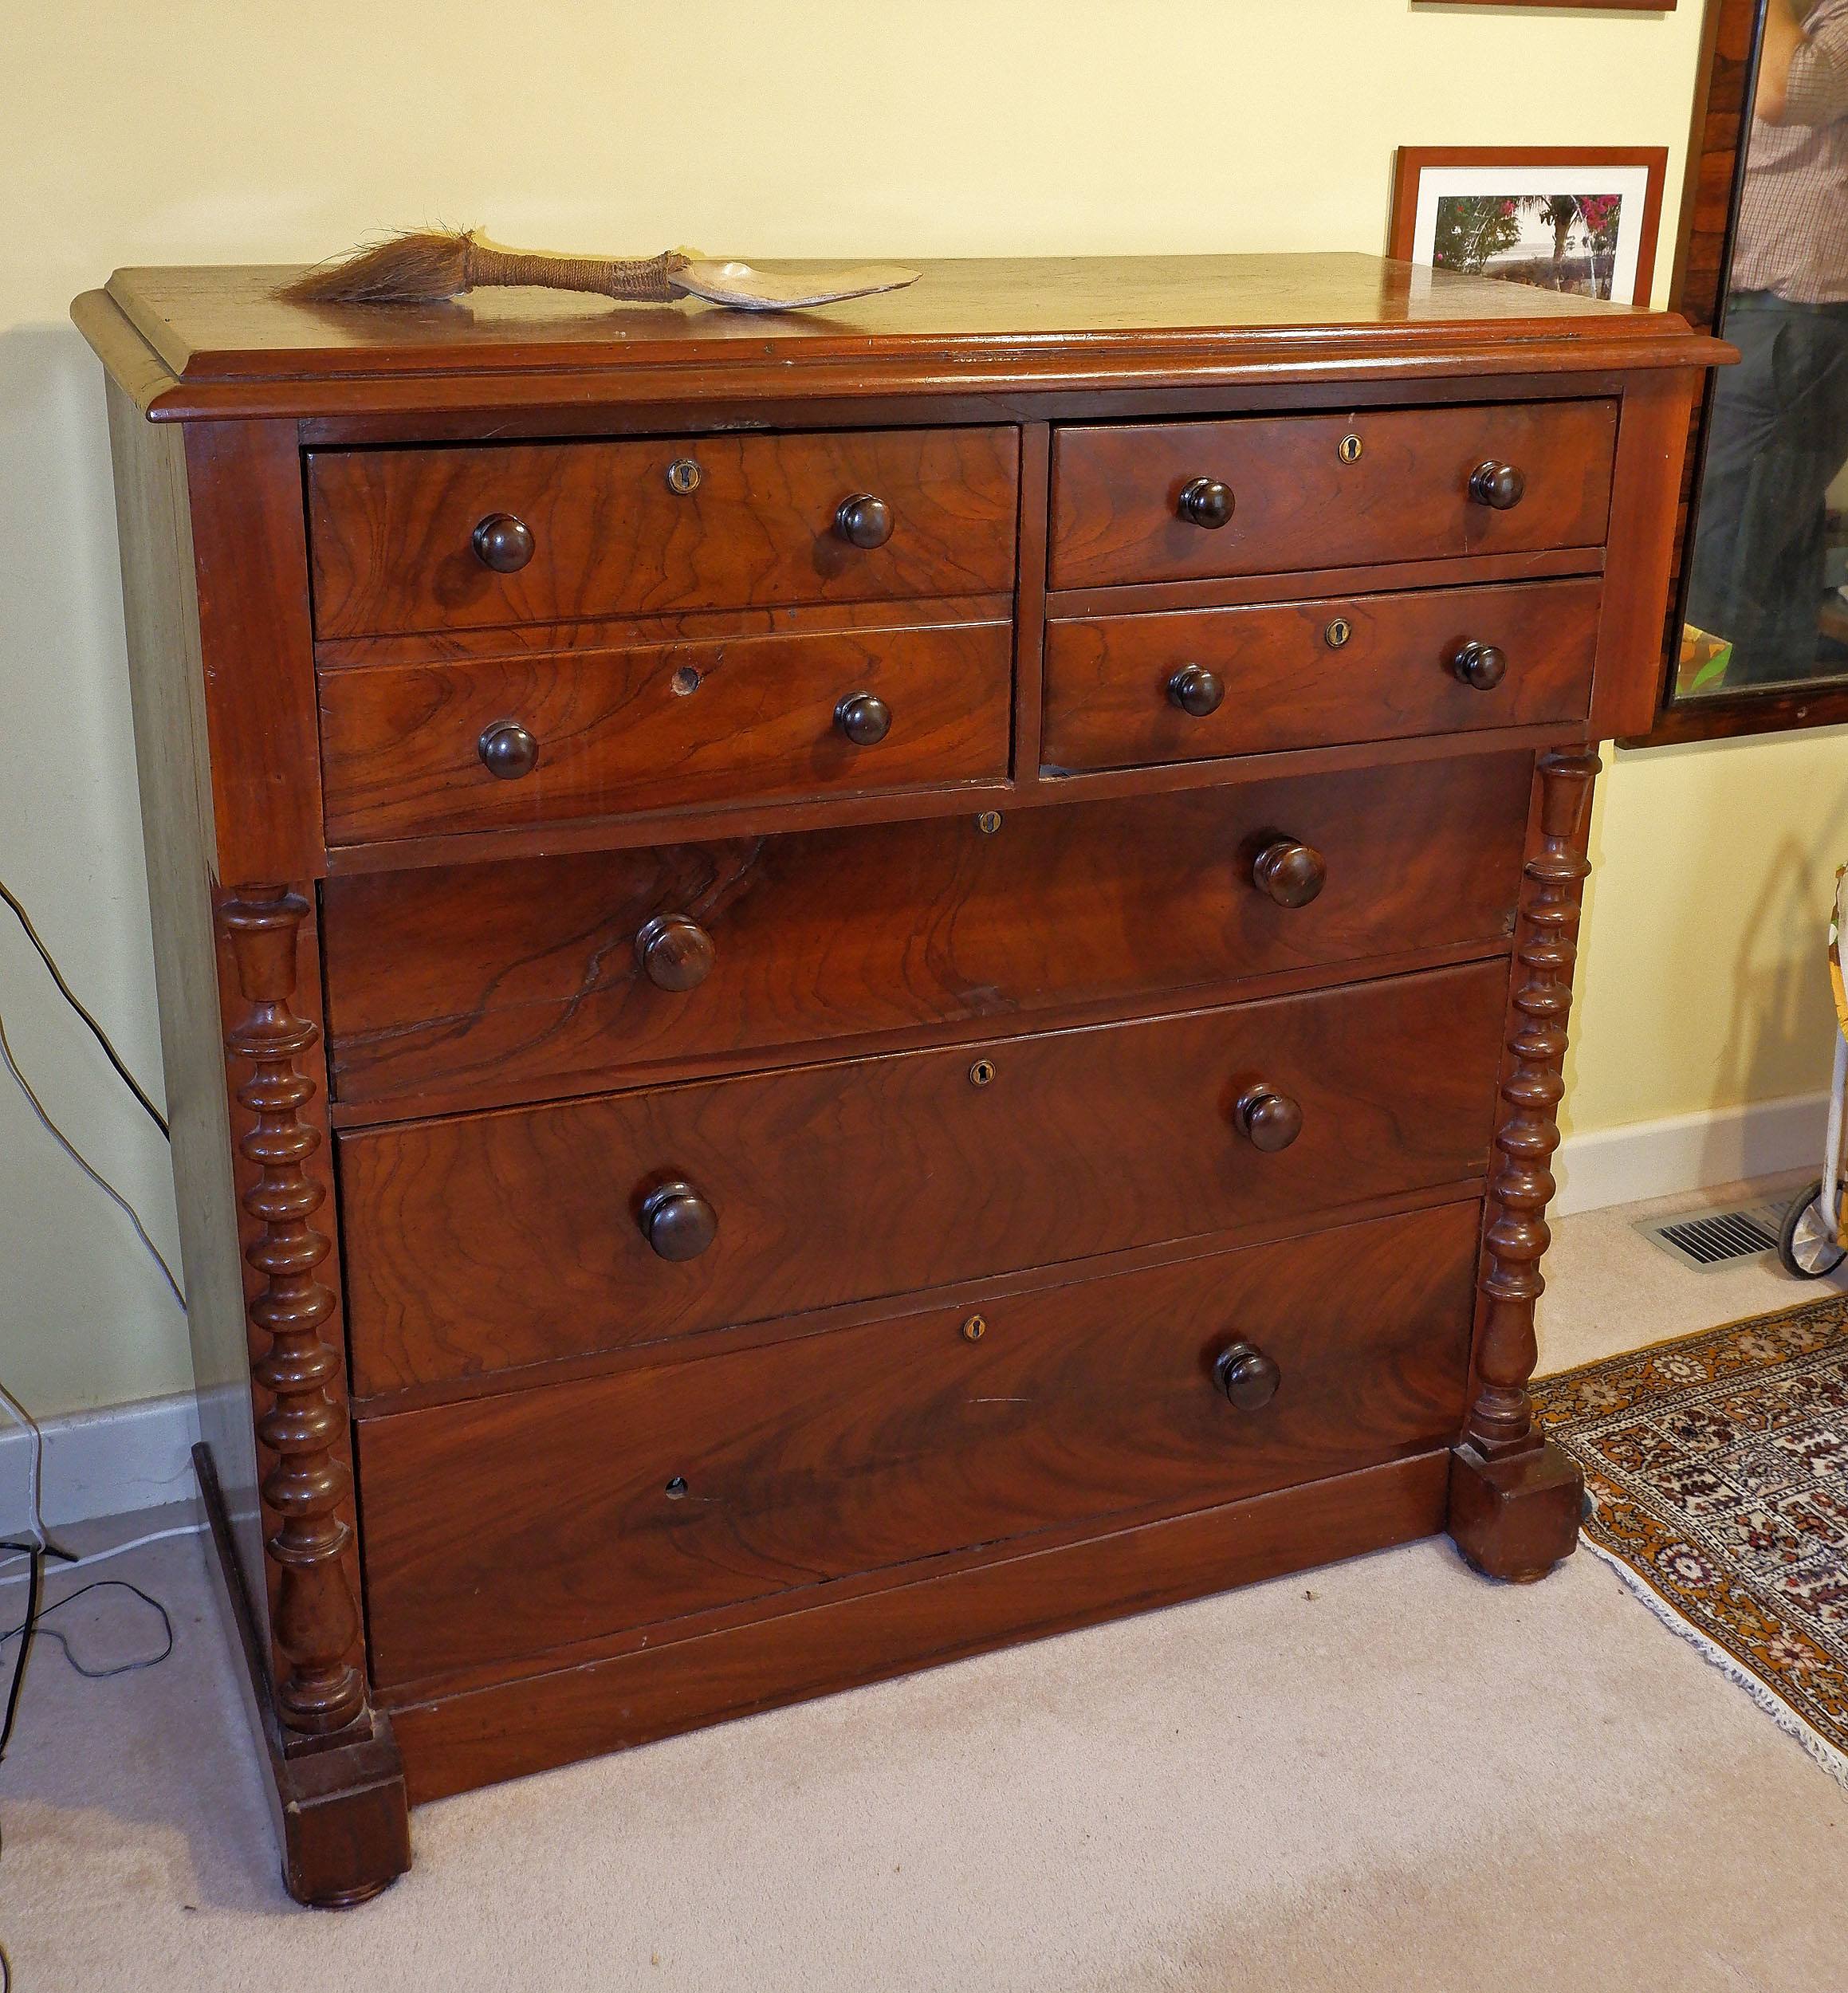 'Australian Cedar Chest of Drawers with Cantilever Top and Half Columns, Circa 1870'